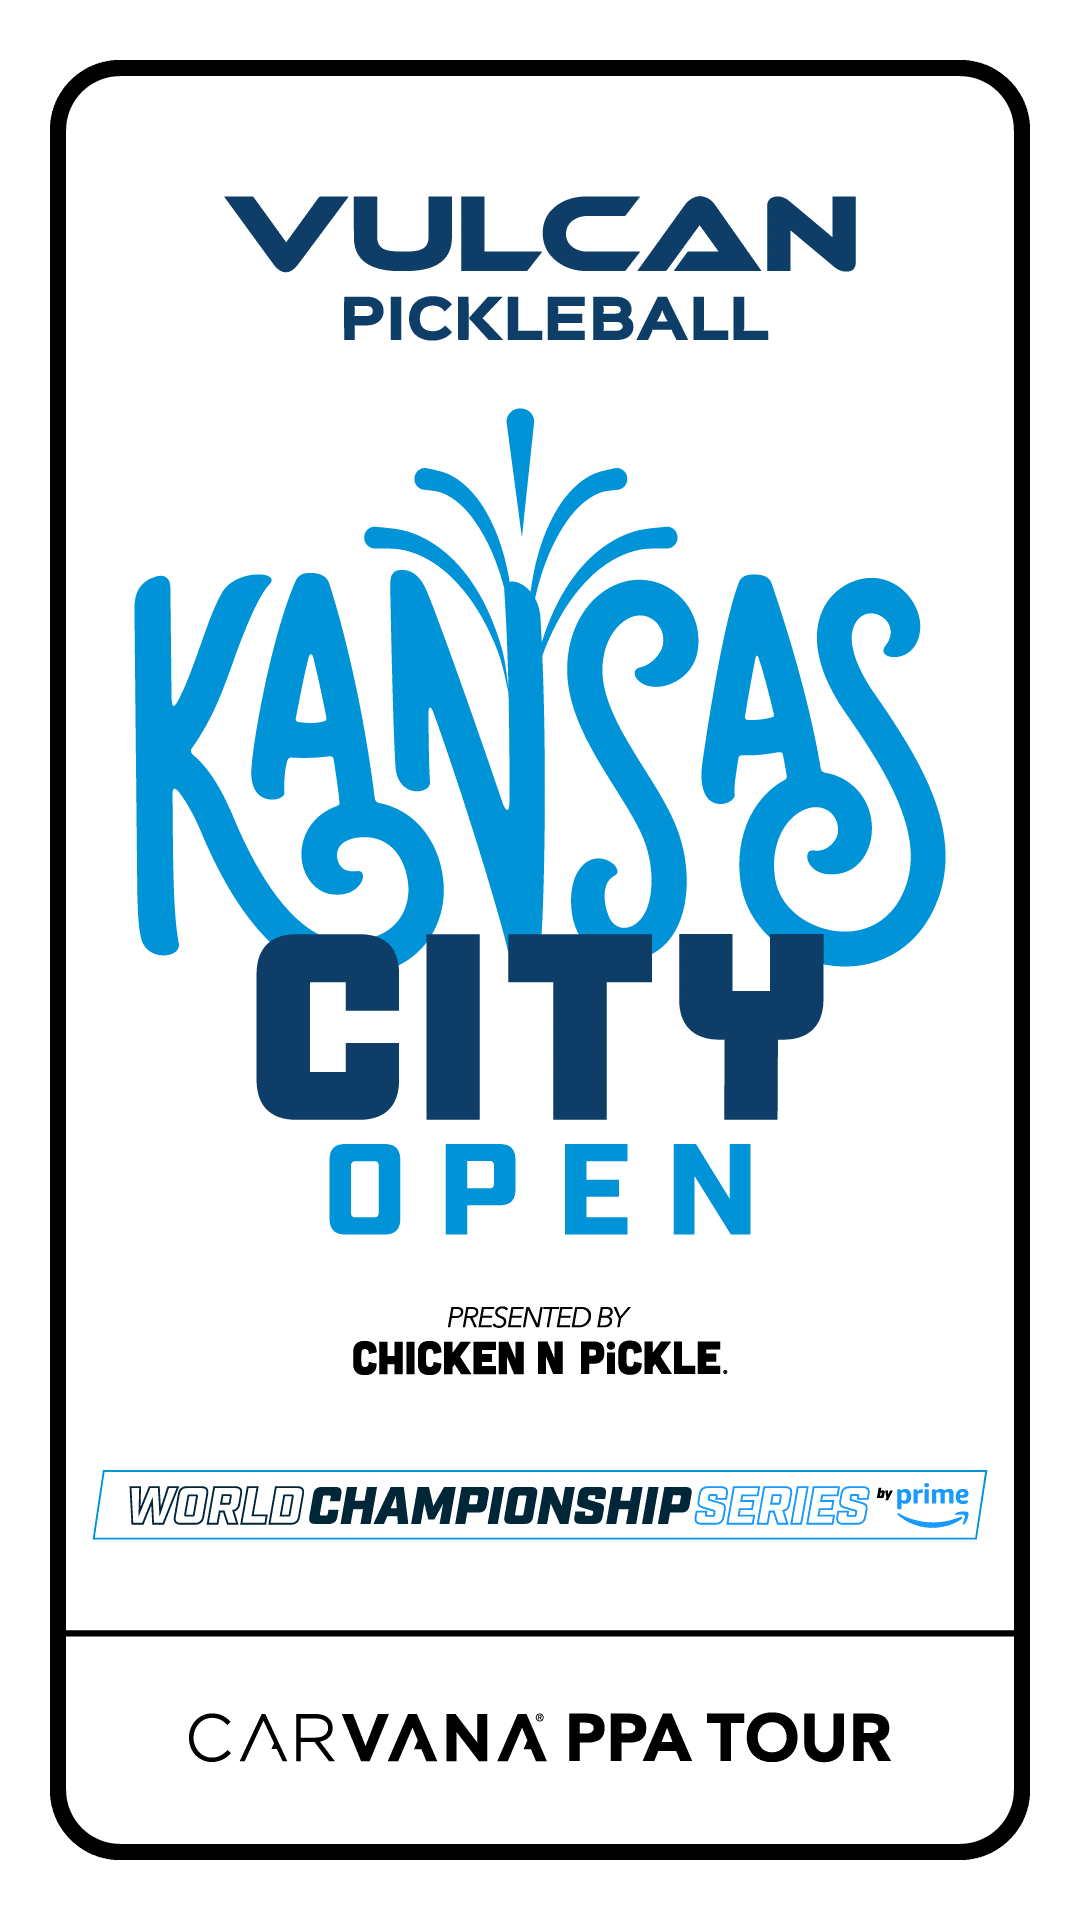 Carvana PPA Tour Vulcan Kansas City Open Presented by Chicken N Pickle Tournament Logo PNG